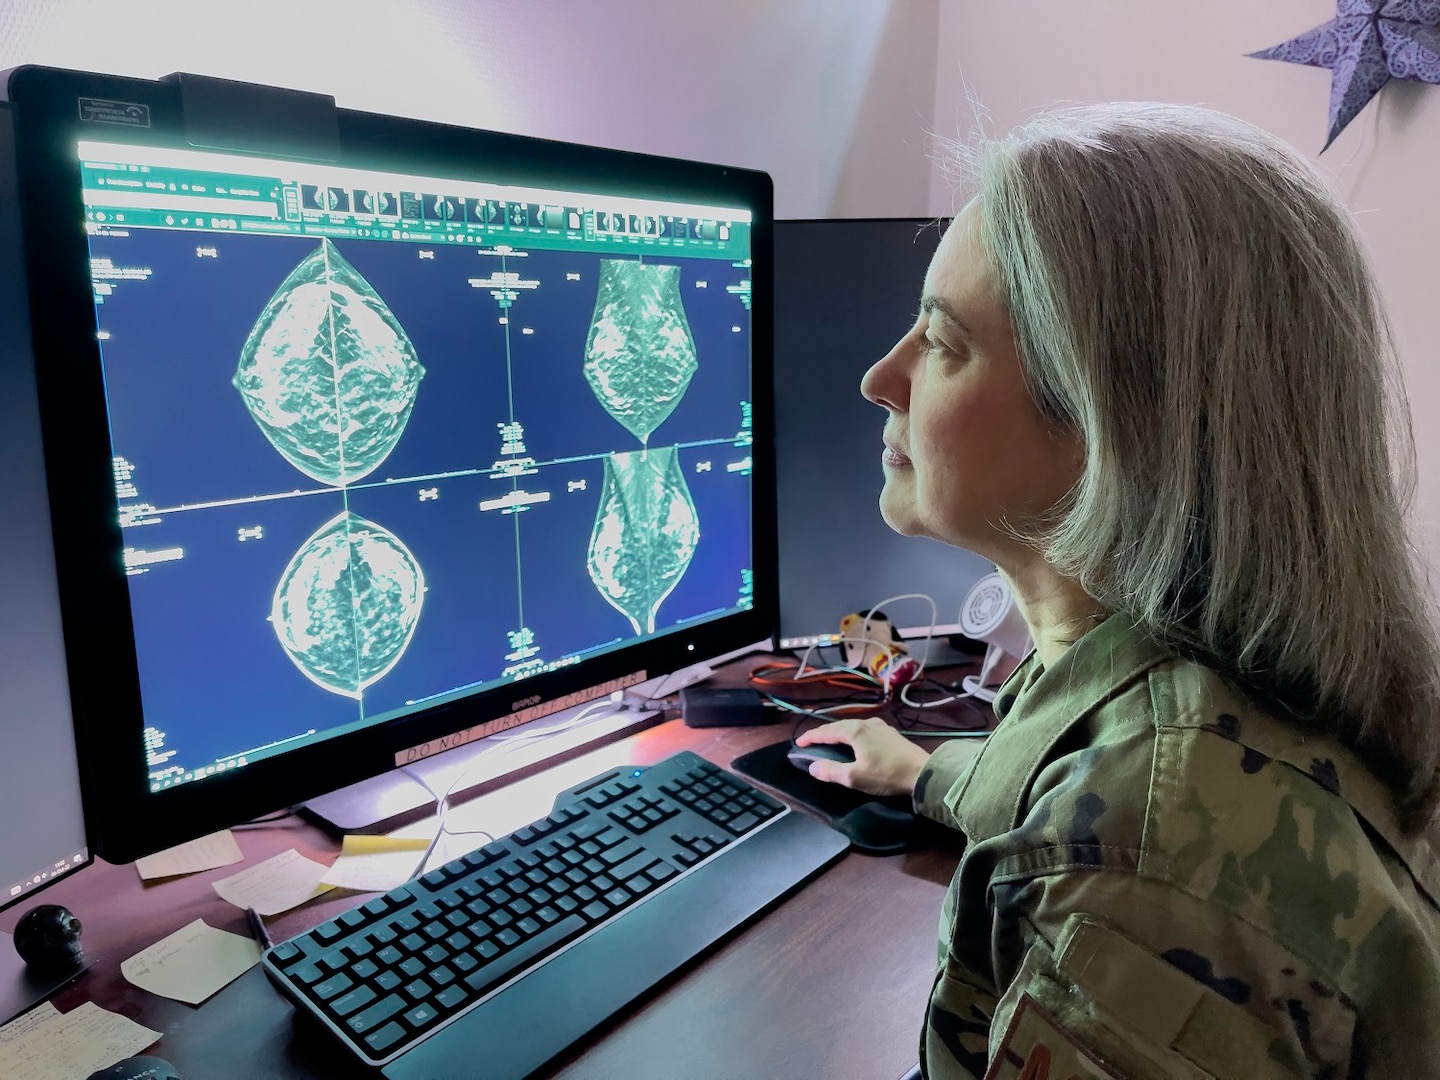 Female Uniformed Service Member looks at mammogram images on a monitor with a keyboard.